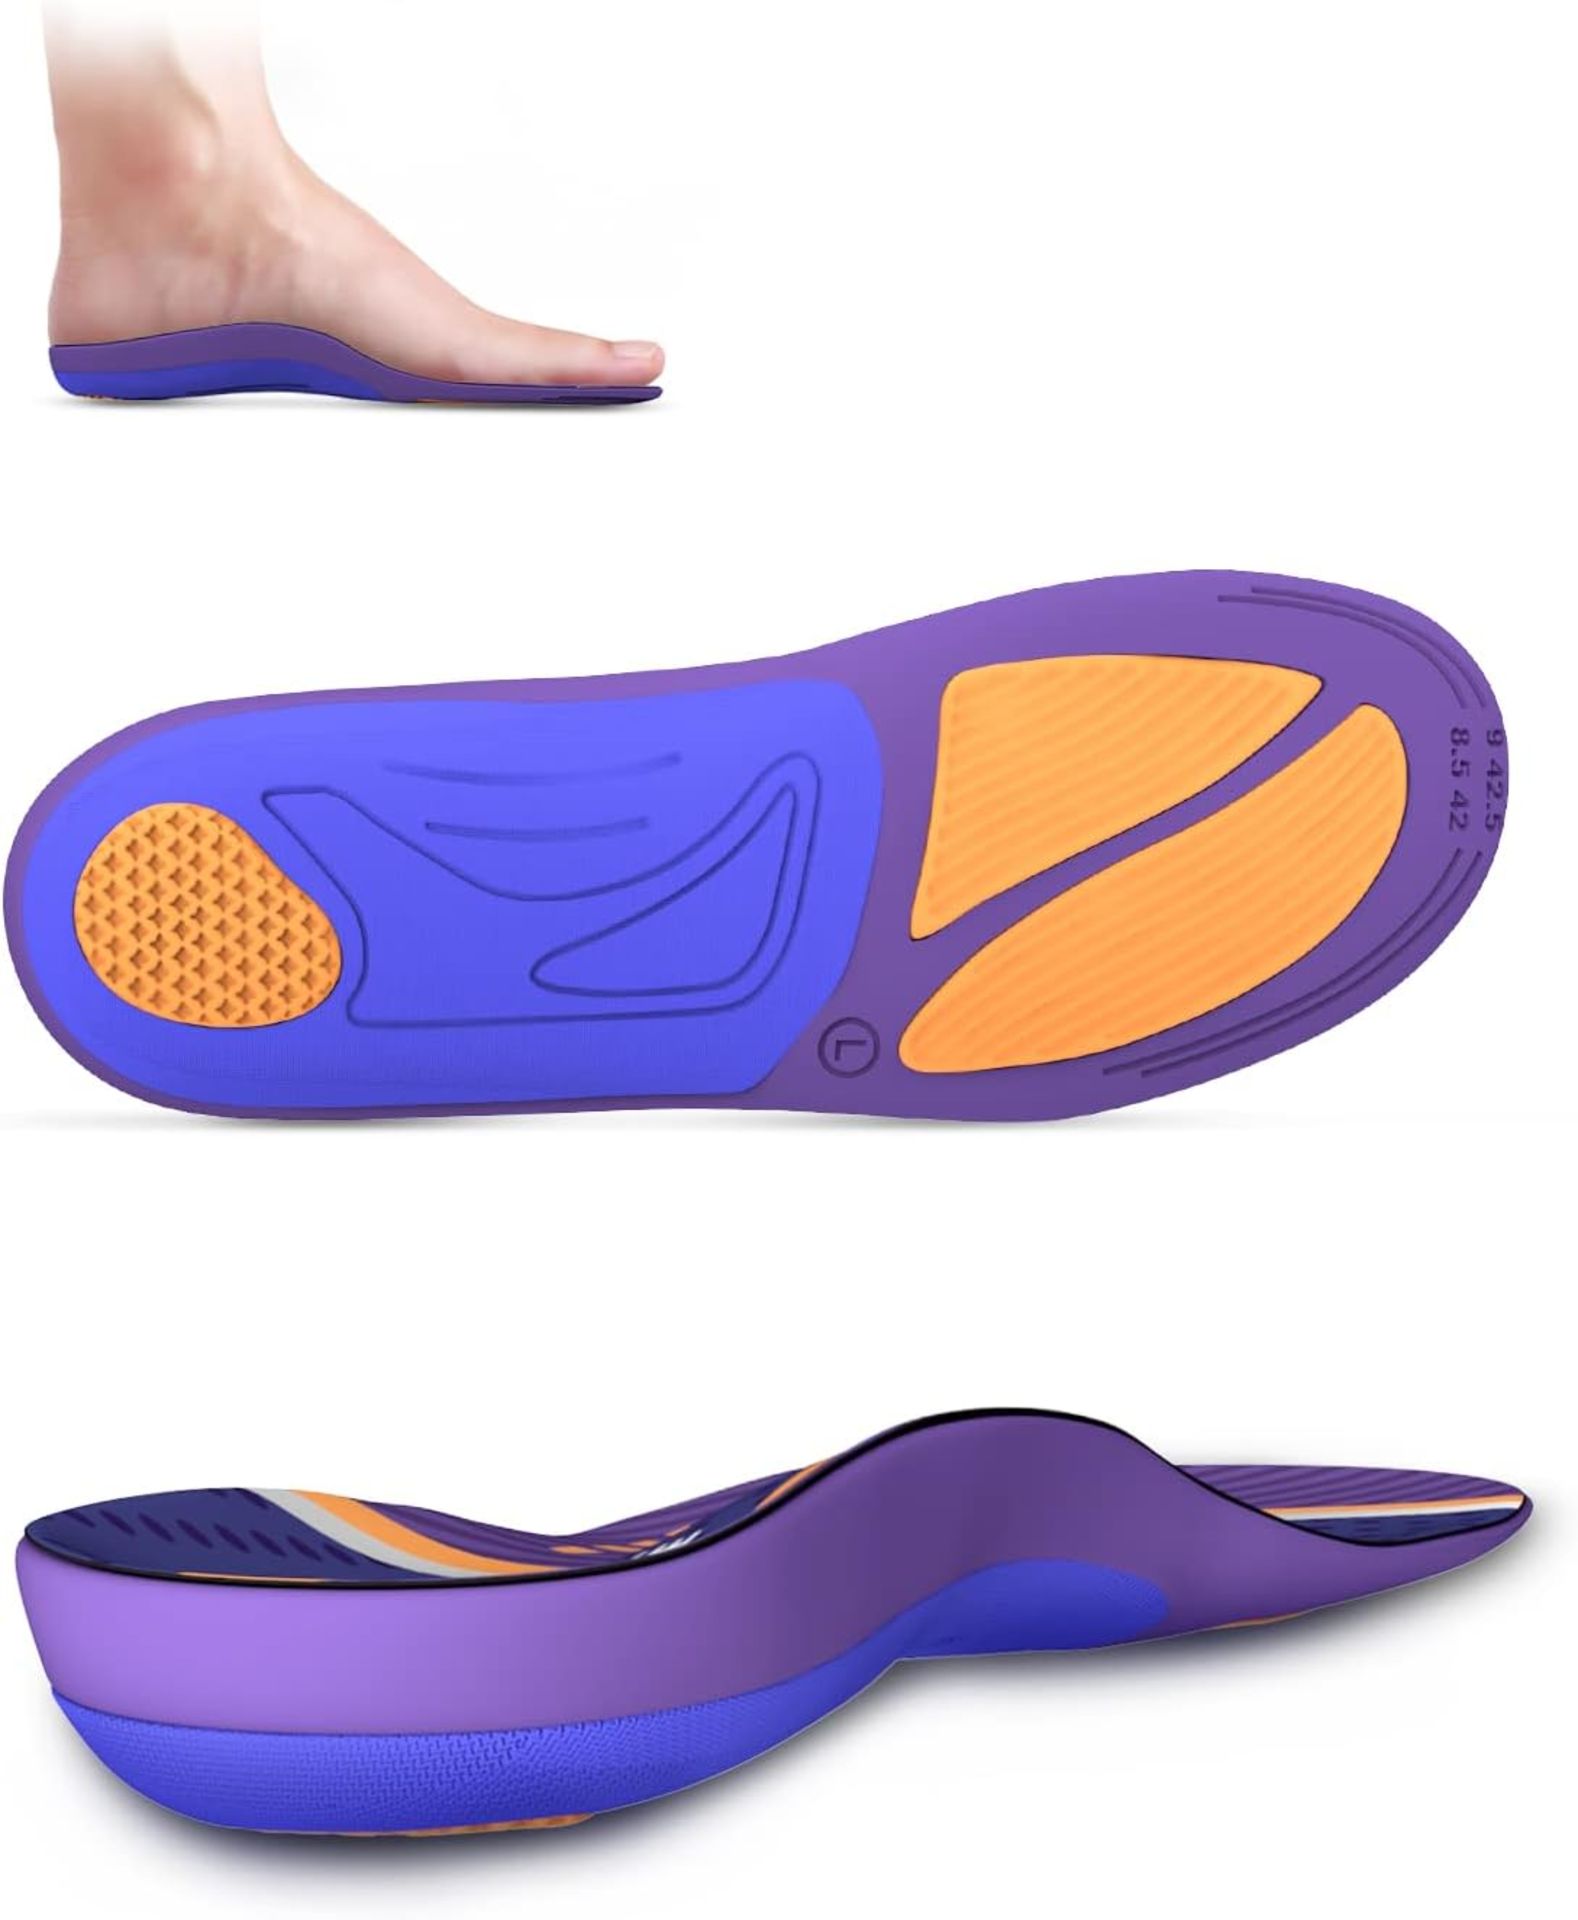 Approximate RRP £240 Large Collection of Orthotic Insoles, 18 Pieces